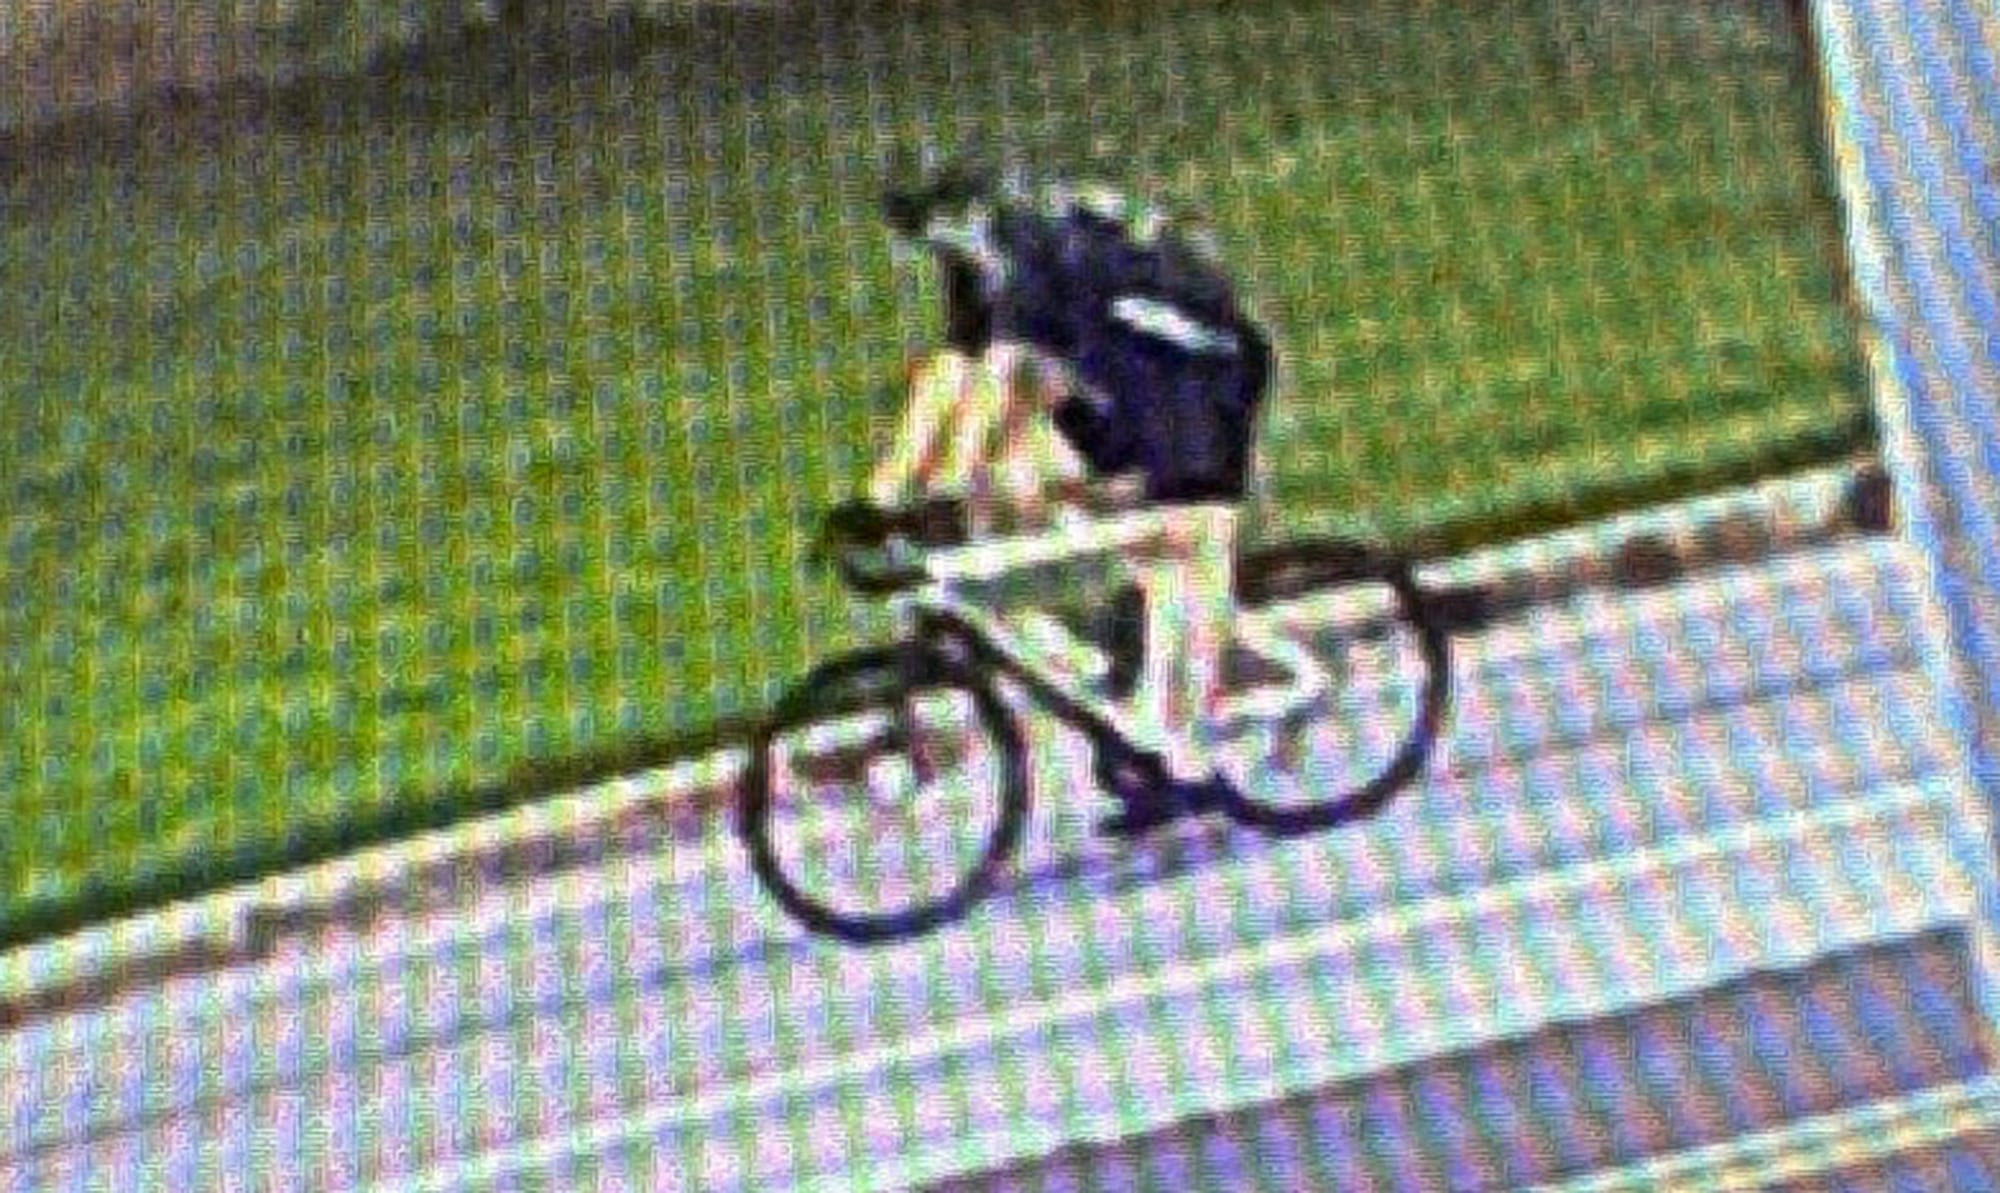 Can you help ID a bicycle rider who struck an elementary student in Dover Township?